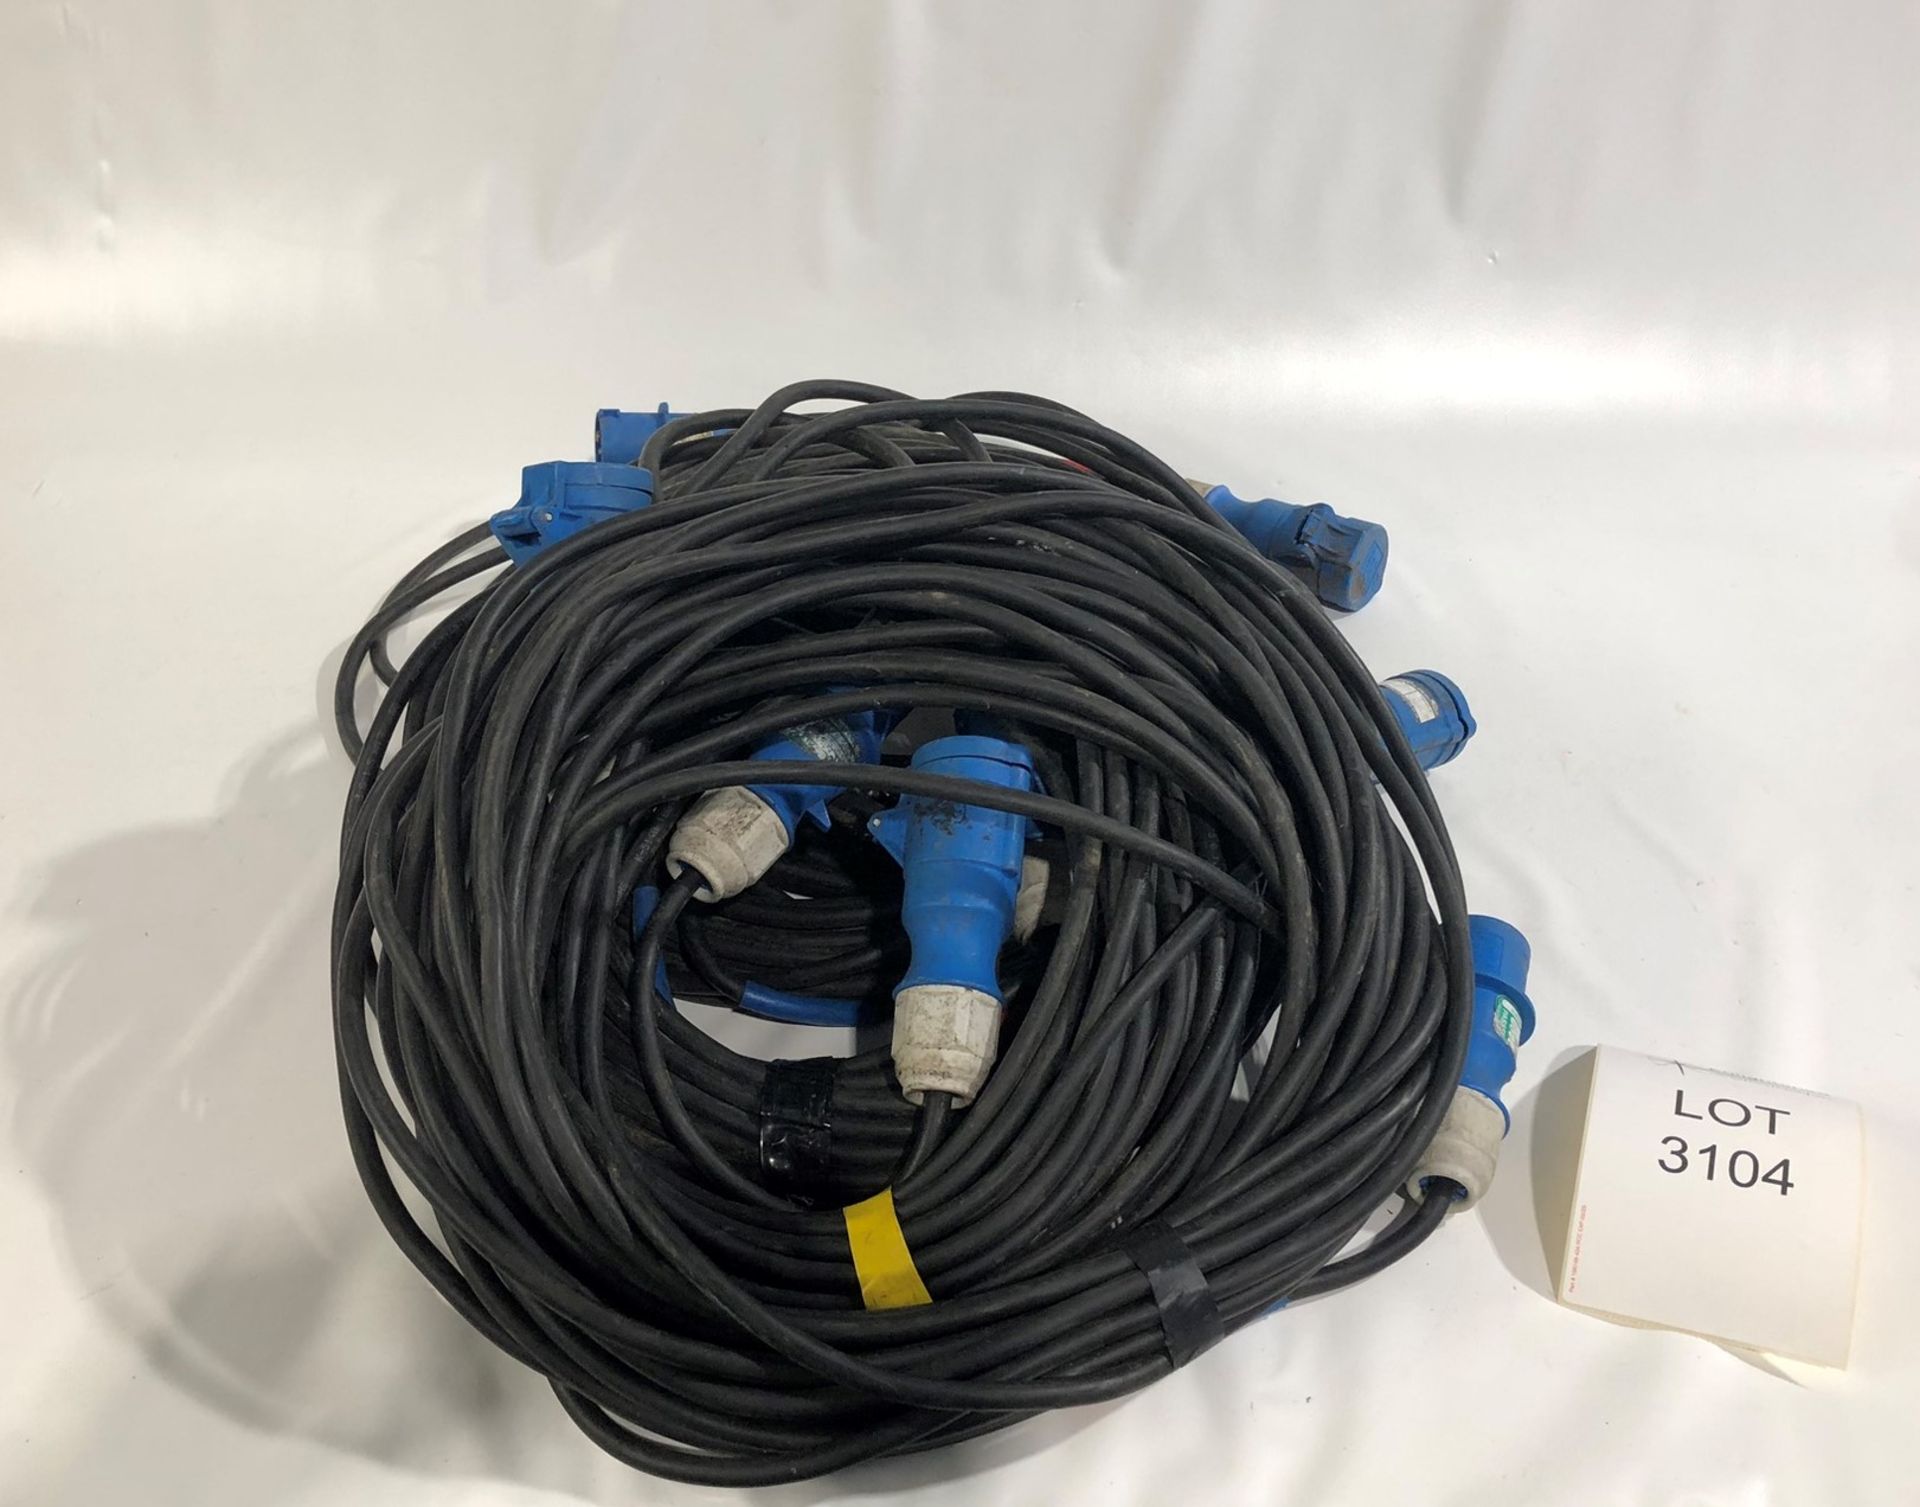 16a HO7 cable: 5x 20m Condition: Ex-Hire Set of 5x 20m 16a Cable 1.5mm HO7 with blue connectors Lots